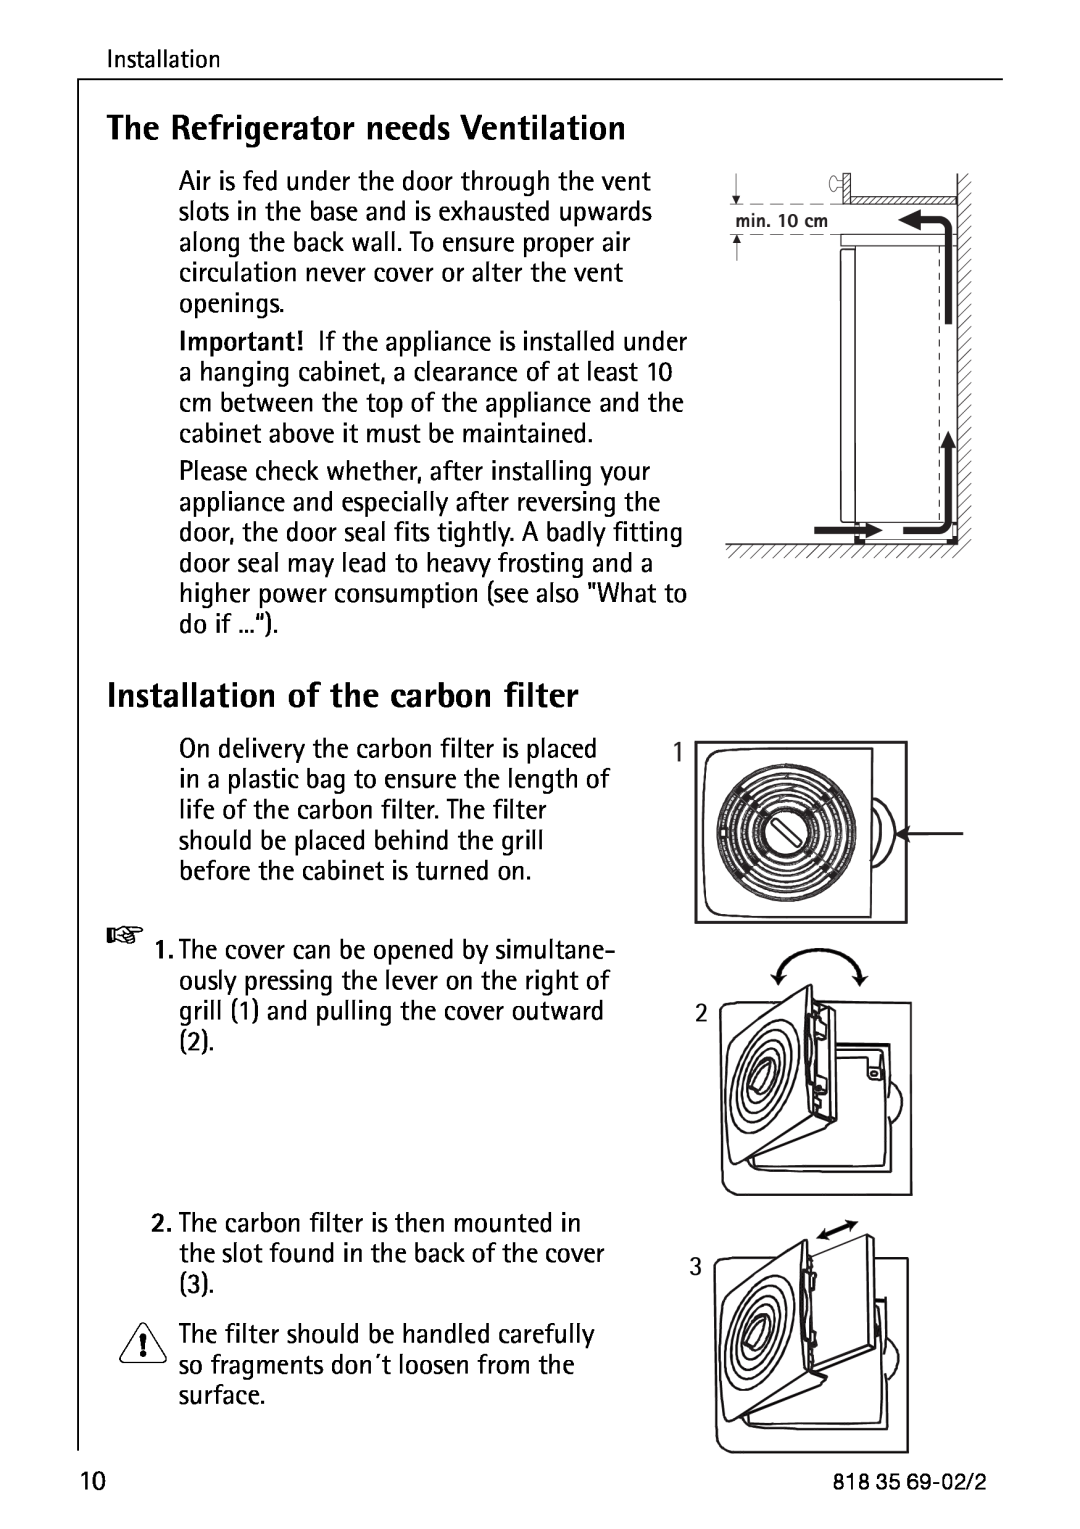 AEG S75578KG3 manual The Refrigerator needs Ventilation, Installation of the carbon filter 